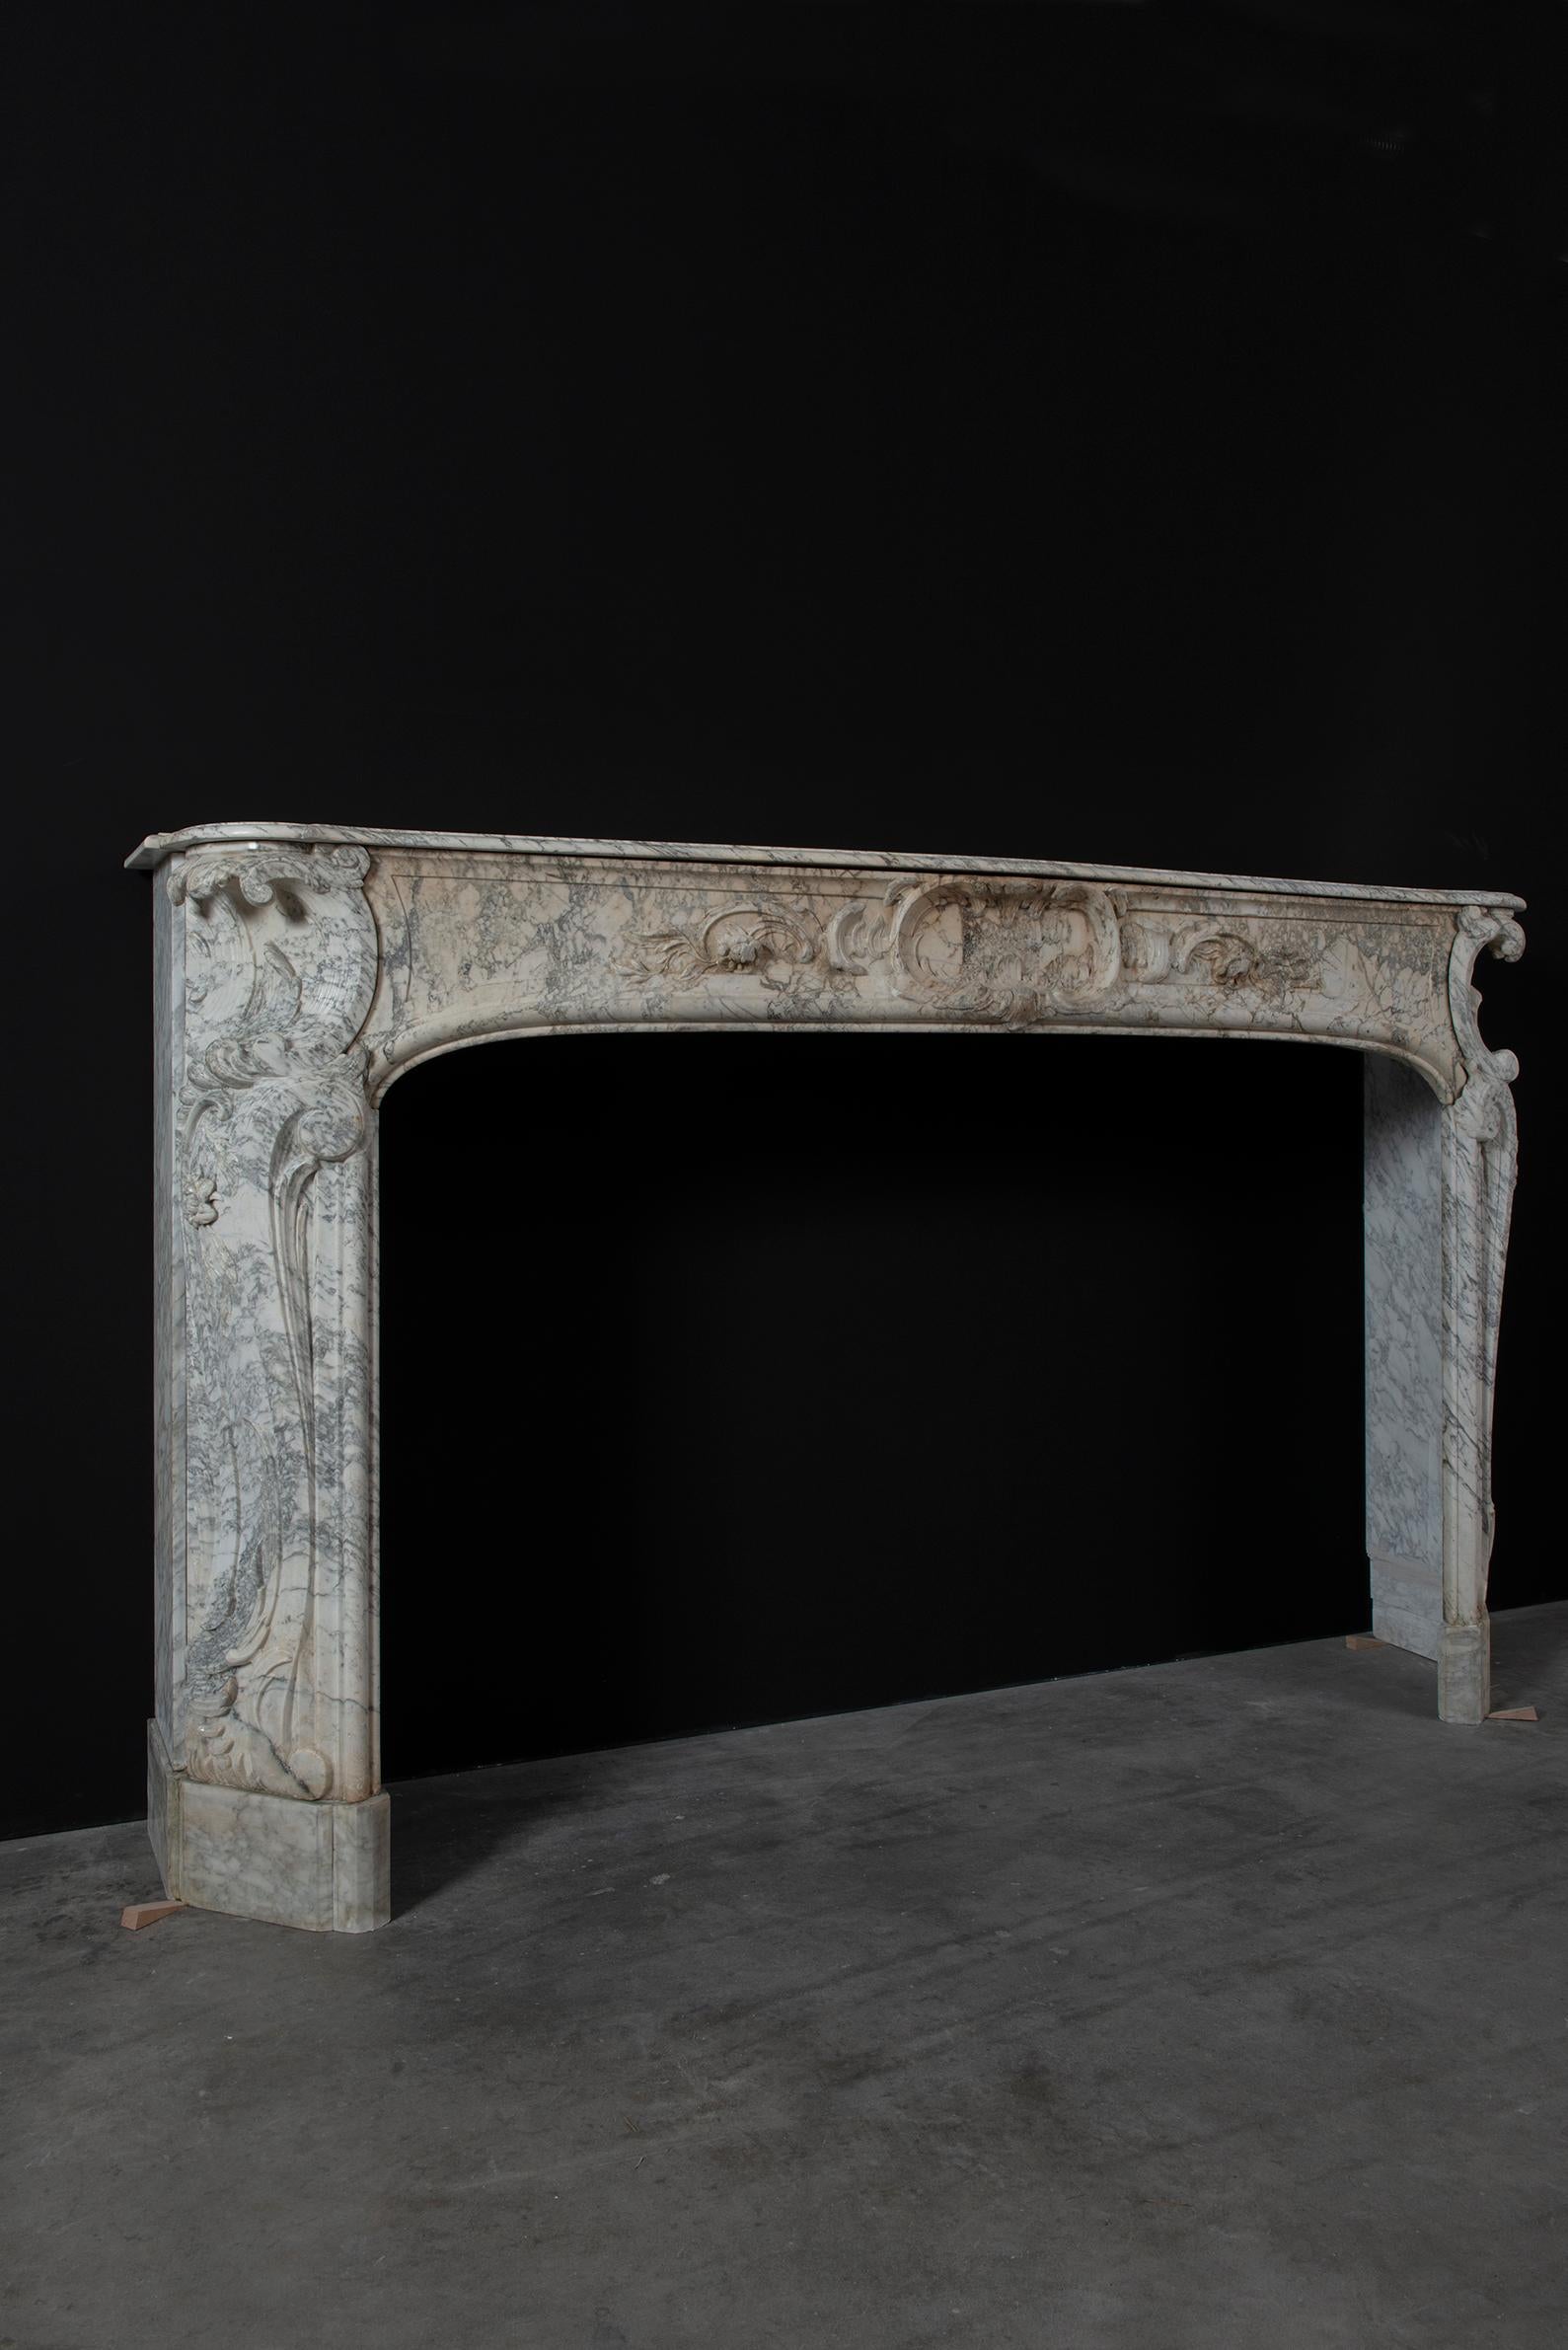 Alluring 18th Century Dutch Louis XV Fireplace Mantel In Distressed Condition For Sale In Haarlem, Noord-Holland